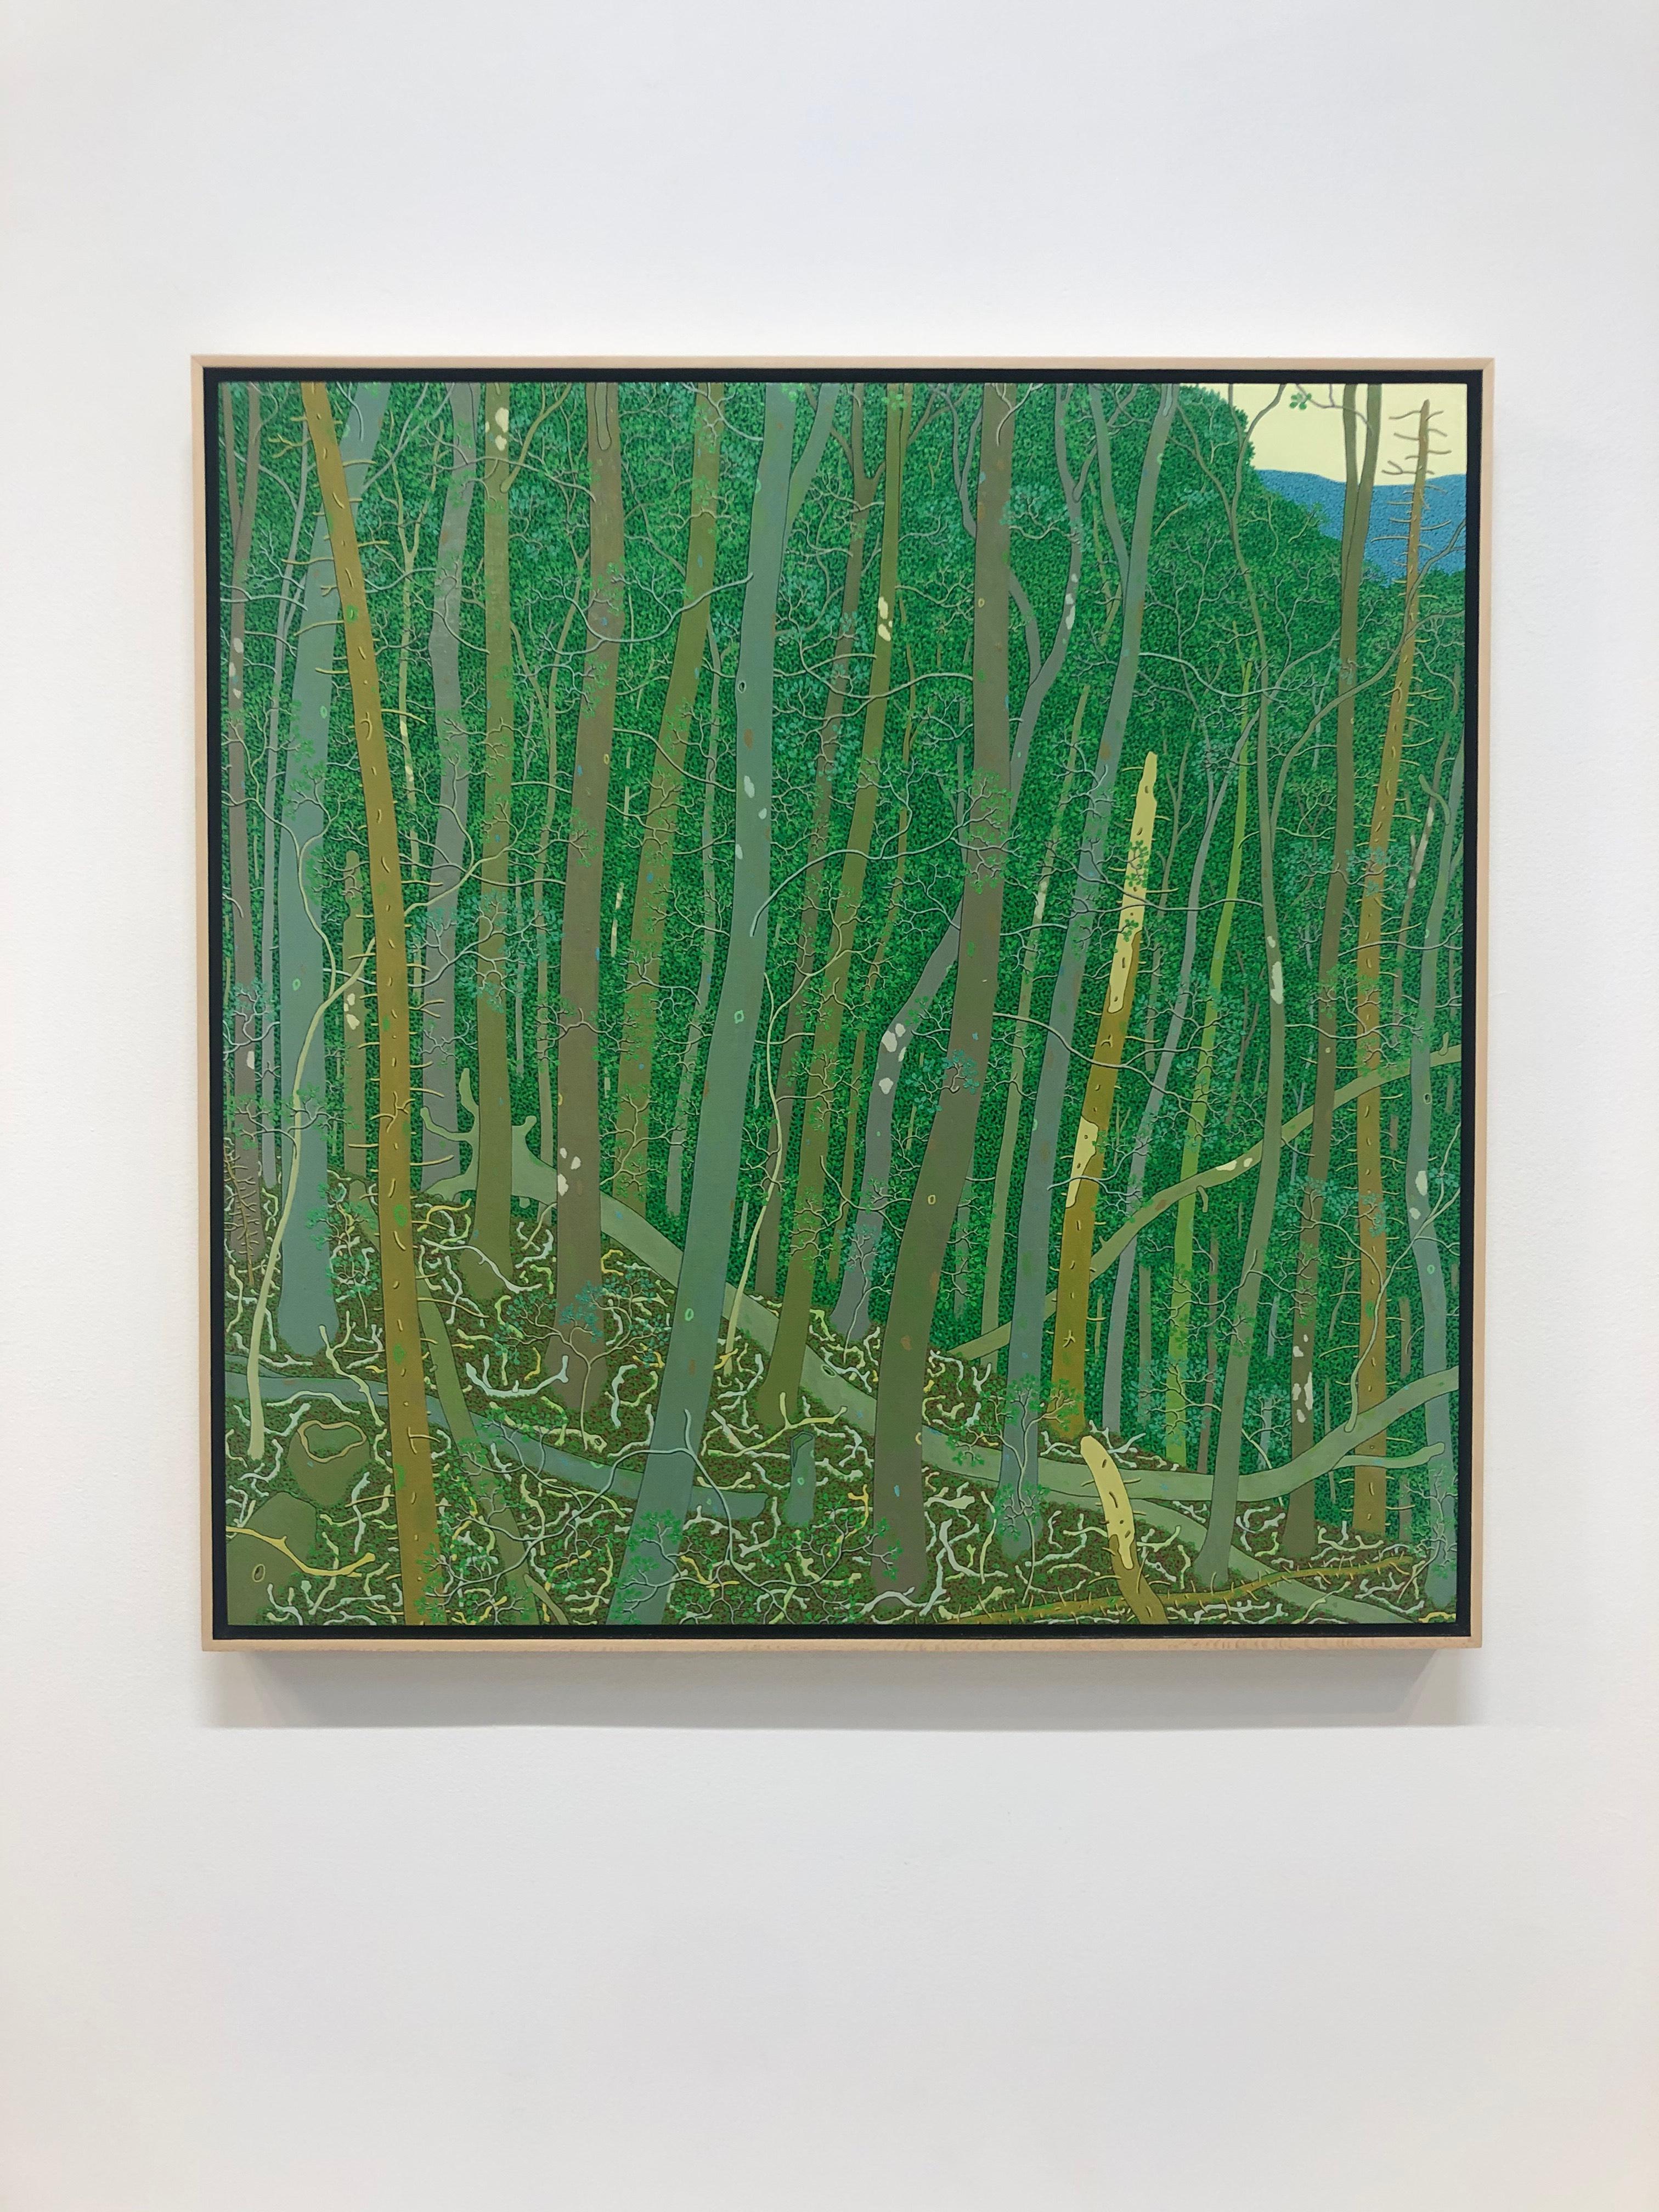 A View of Slaters Ridge from Wyatt Mountain, Green Forest Landscape, Trees - Contemporary Painting by Gregory Hennen